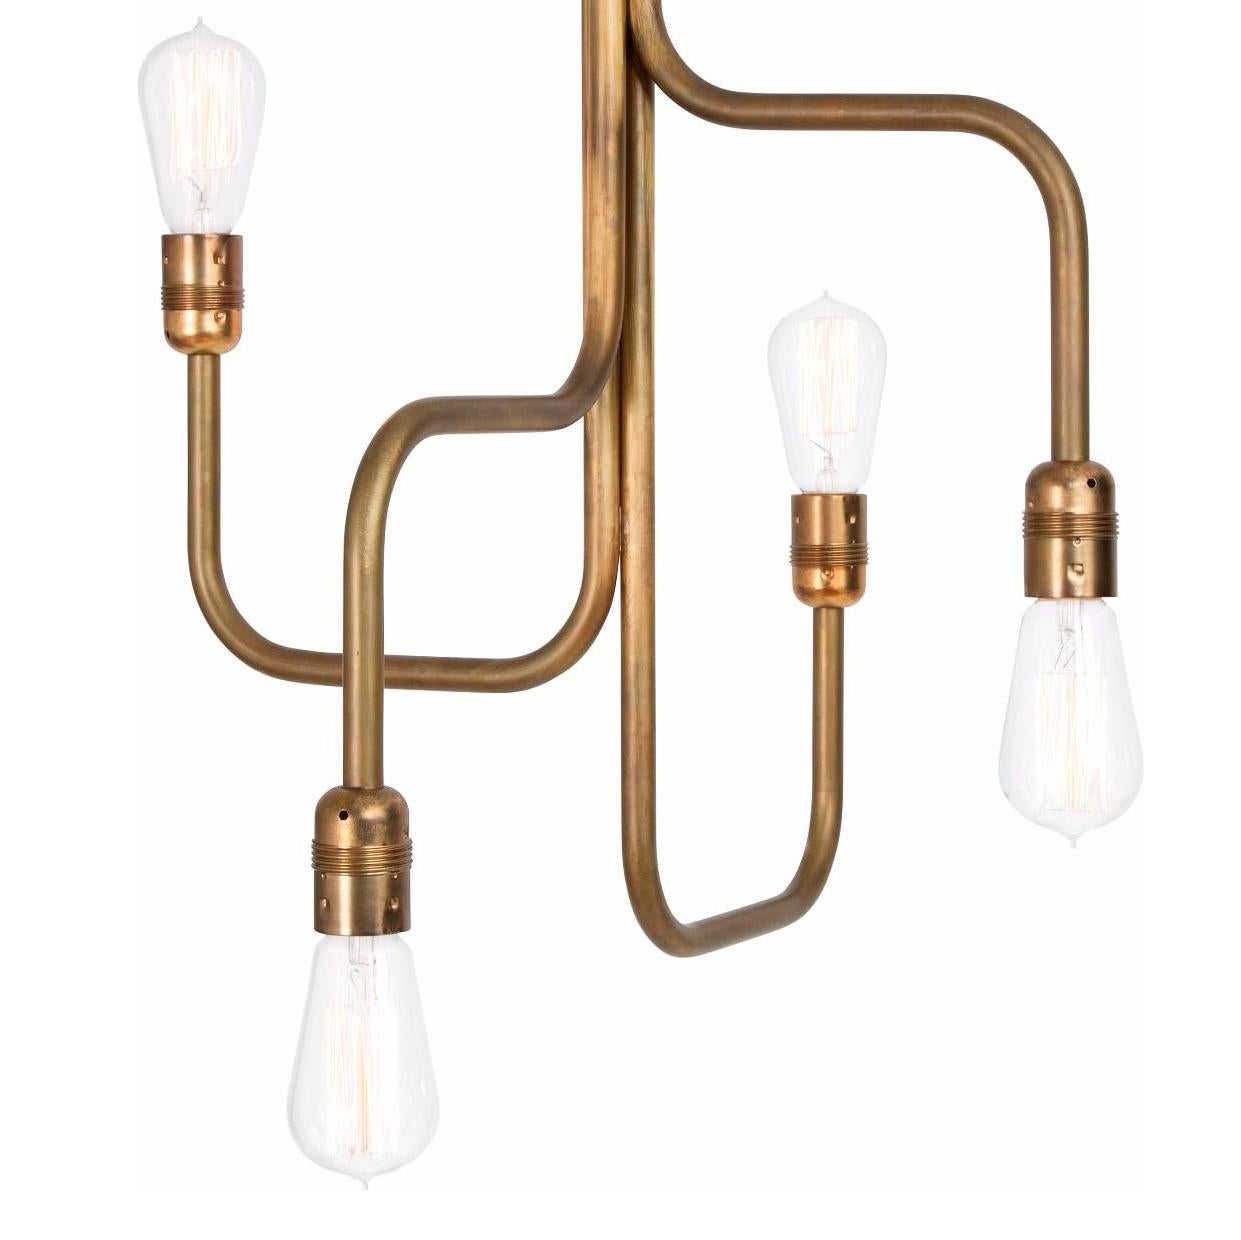 Ceiling lamp designed by Sabina Grubbeson manufactured by Konsthantverk Tyringe in Sweden.

Strapatz ceiling small
Measures: D 450 mm
H 600 mm, cord 3 m
Max 4 x 60 W E27
3414-6 raw brass

The lamps are wiring with standard Europe